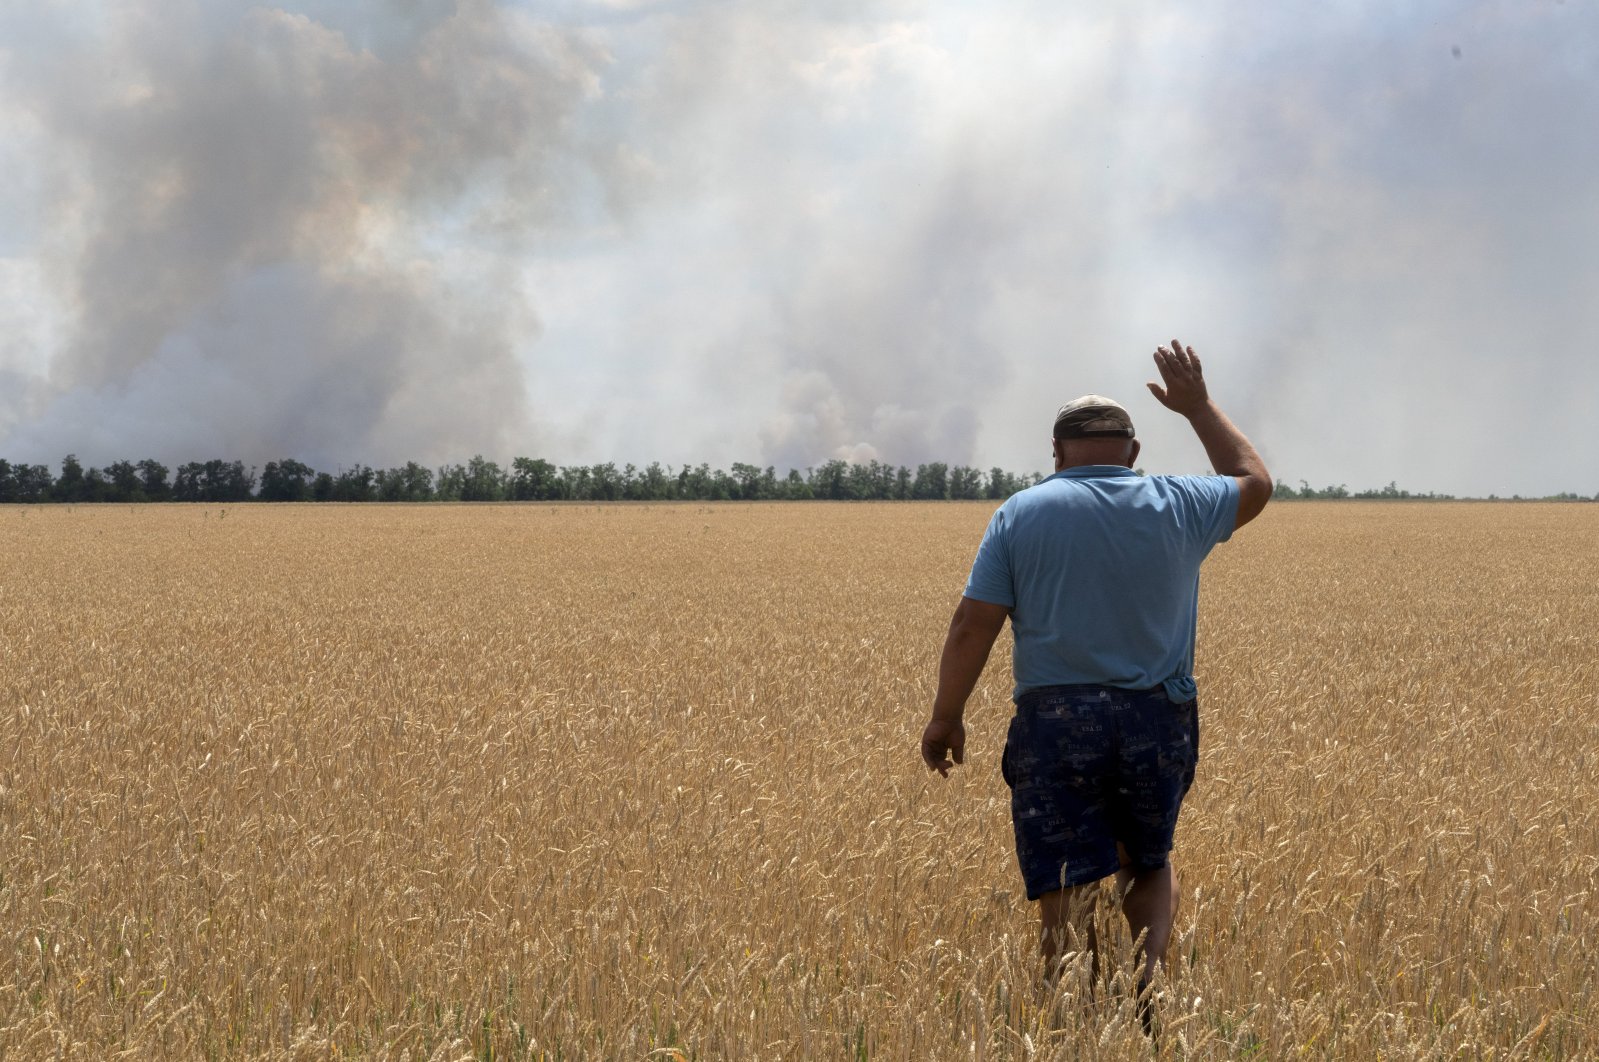 A farmer reacts as he looks at his burning field caused by fighting at the front line in the Dnipropetrovsk region, Ukraine, July 4, 2022. (AP Photo)